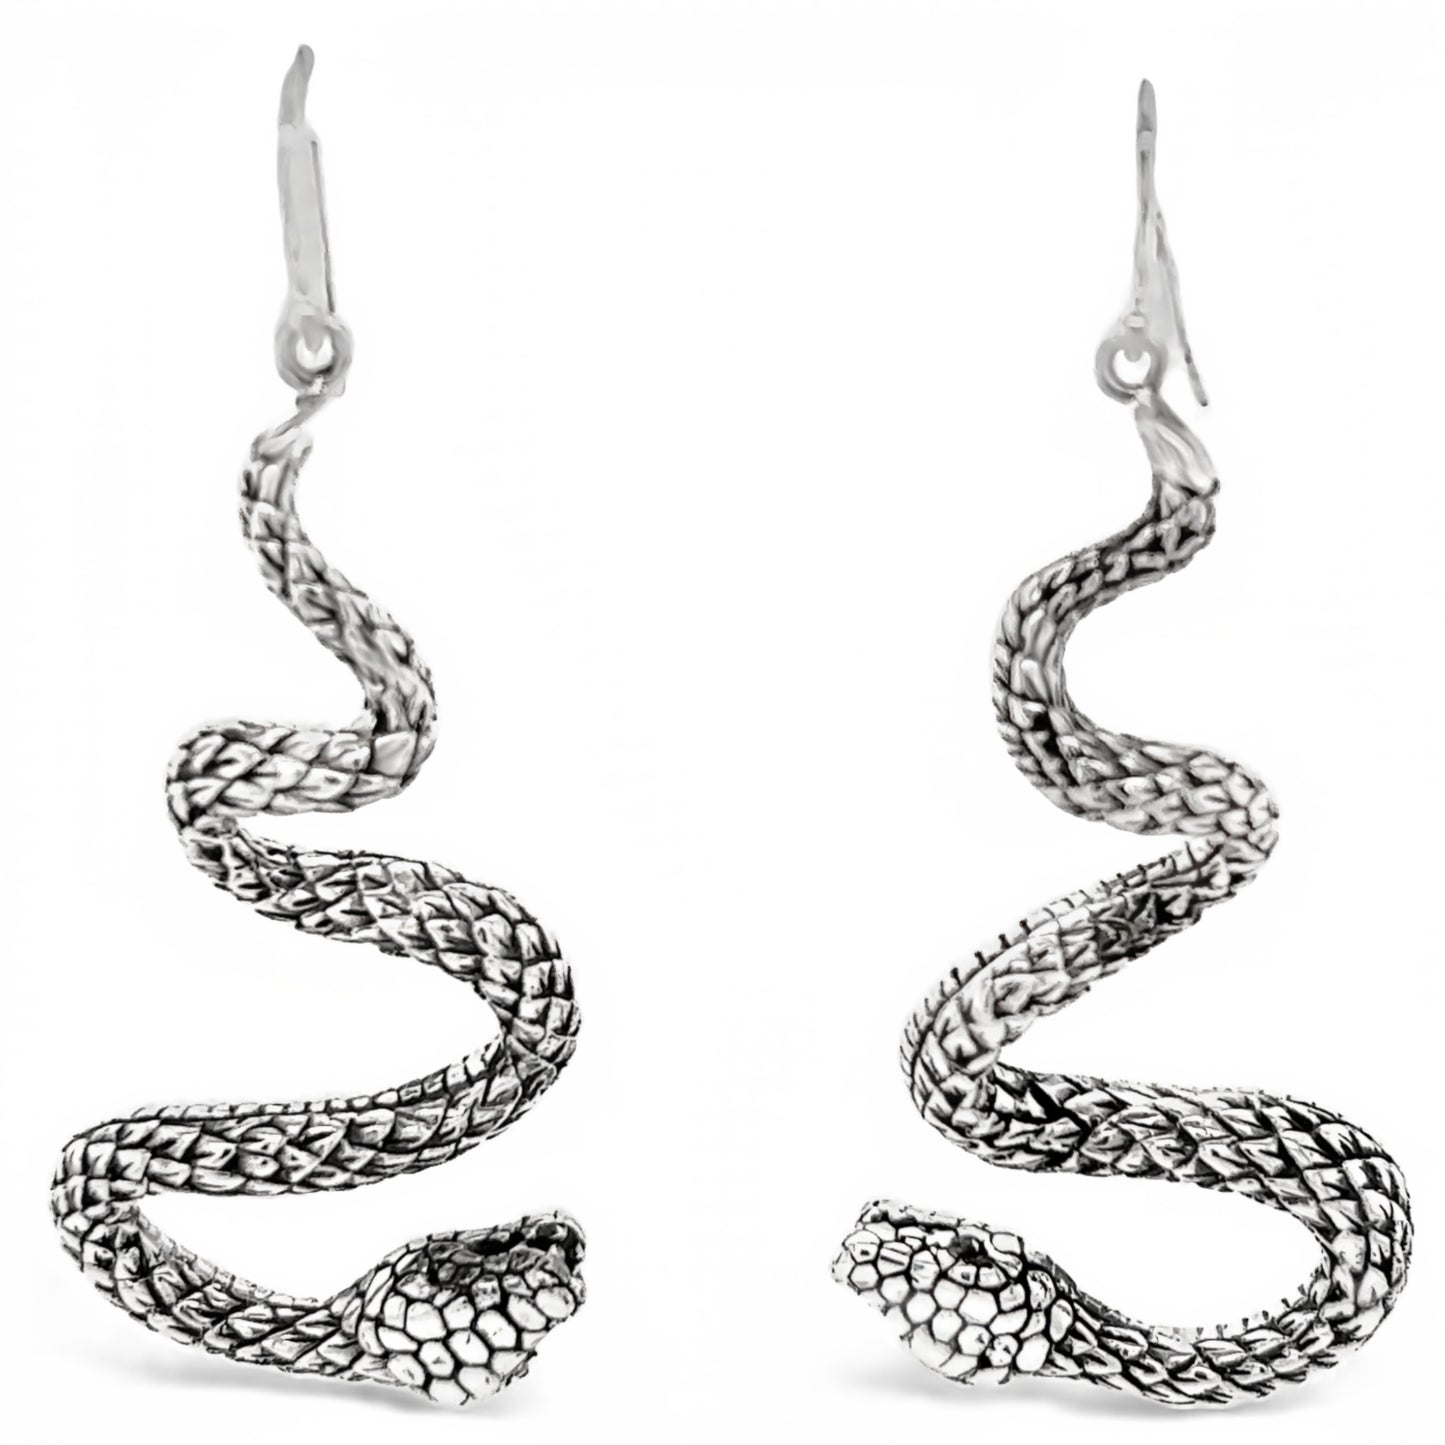 Handcrafted Super Silver Long Twisting Snake Earrings on a white background.